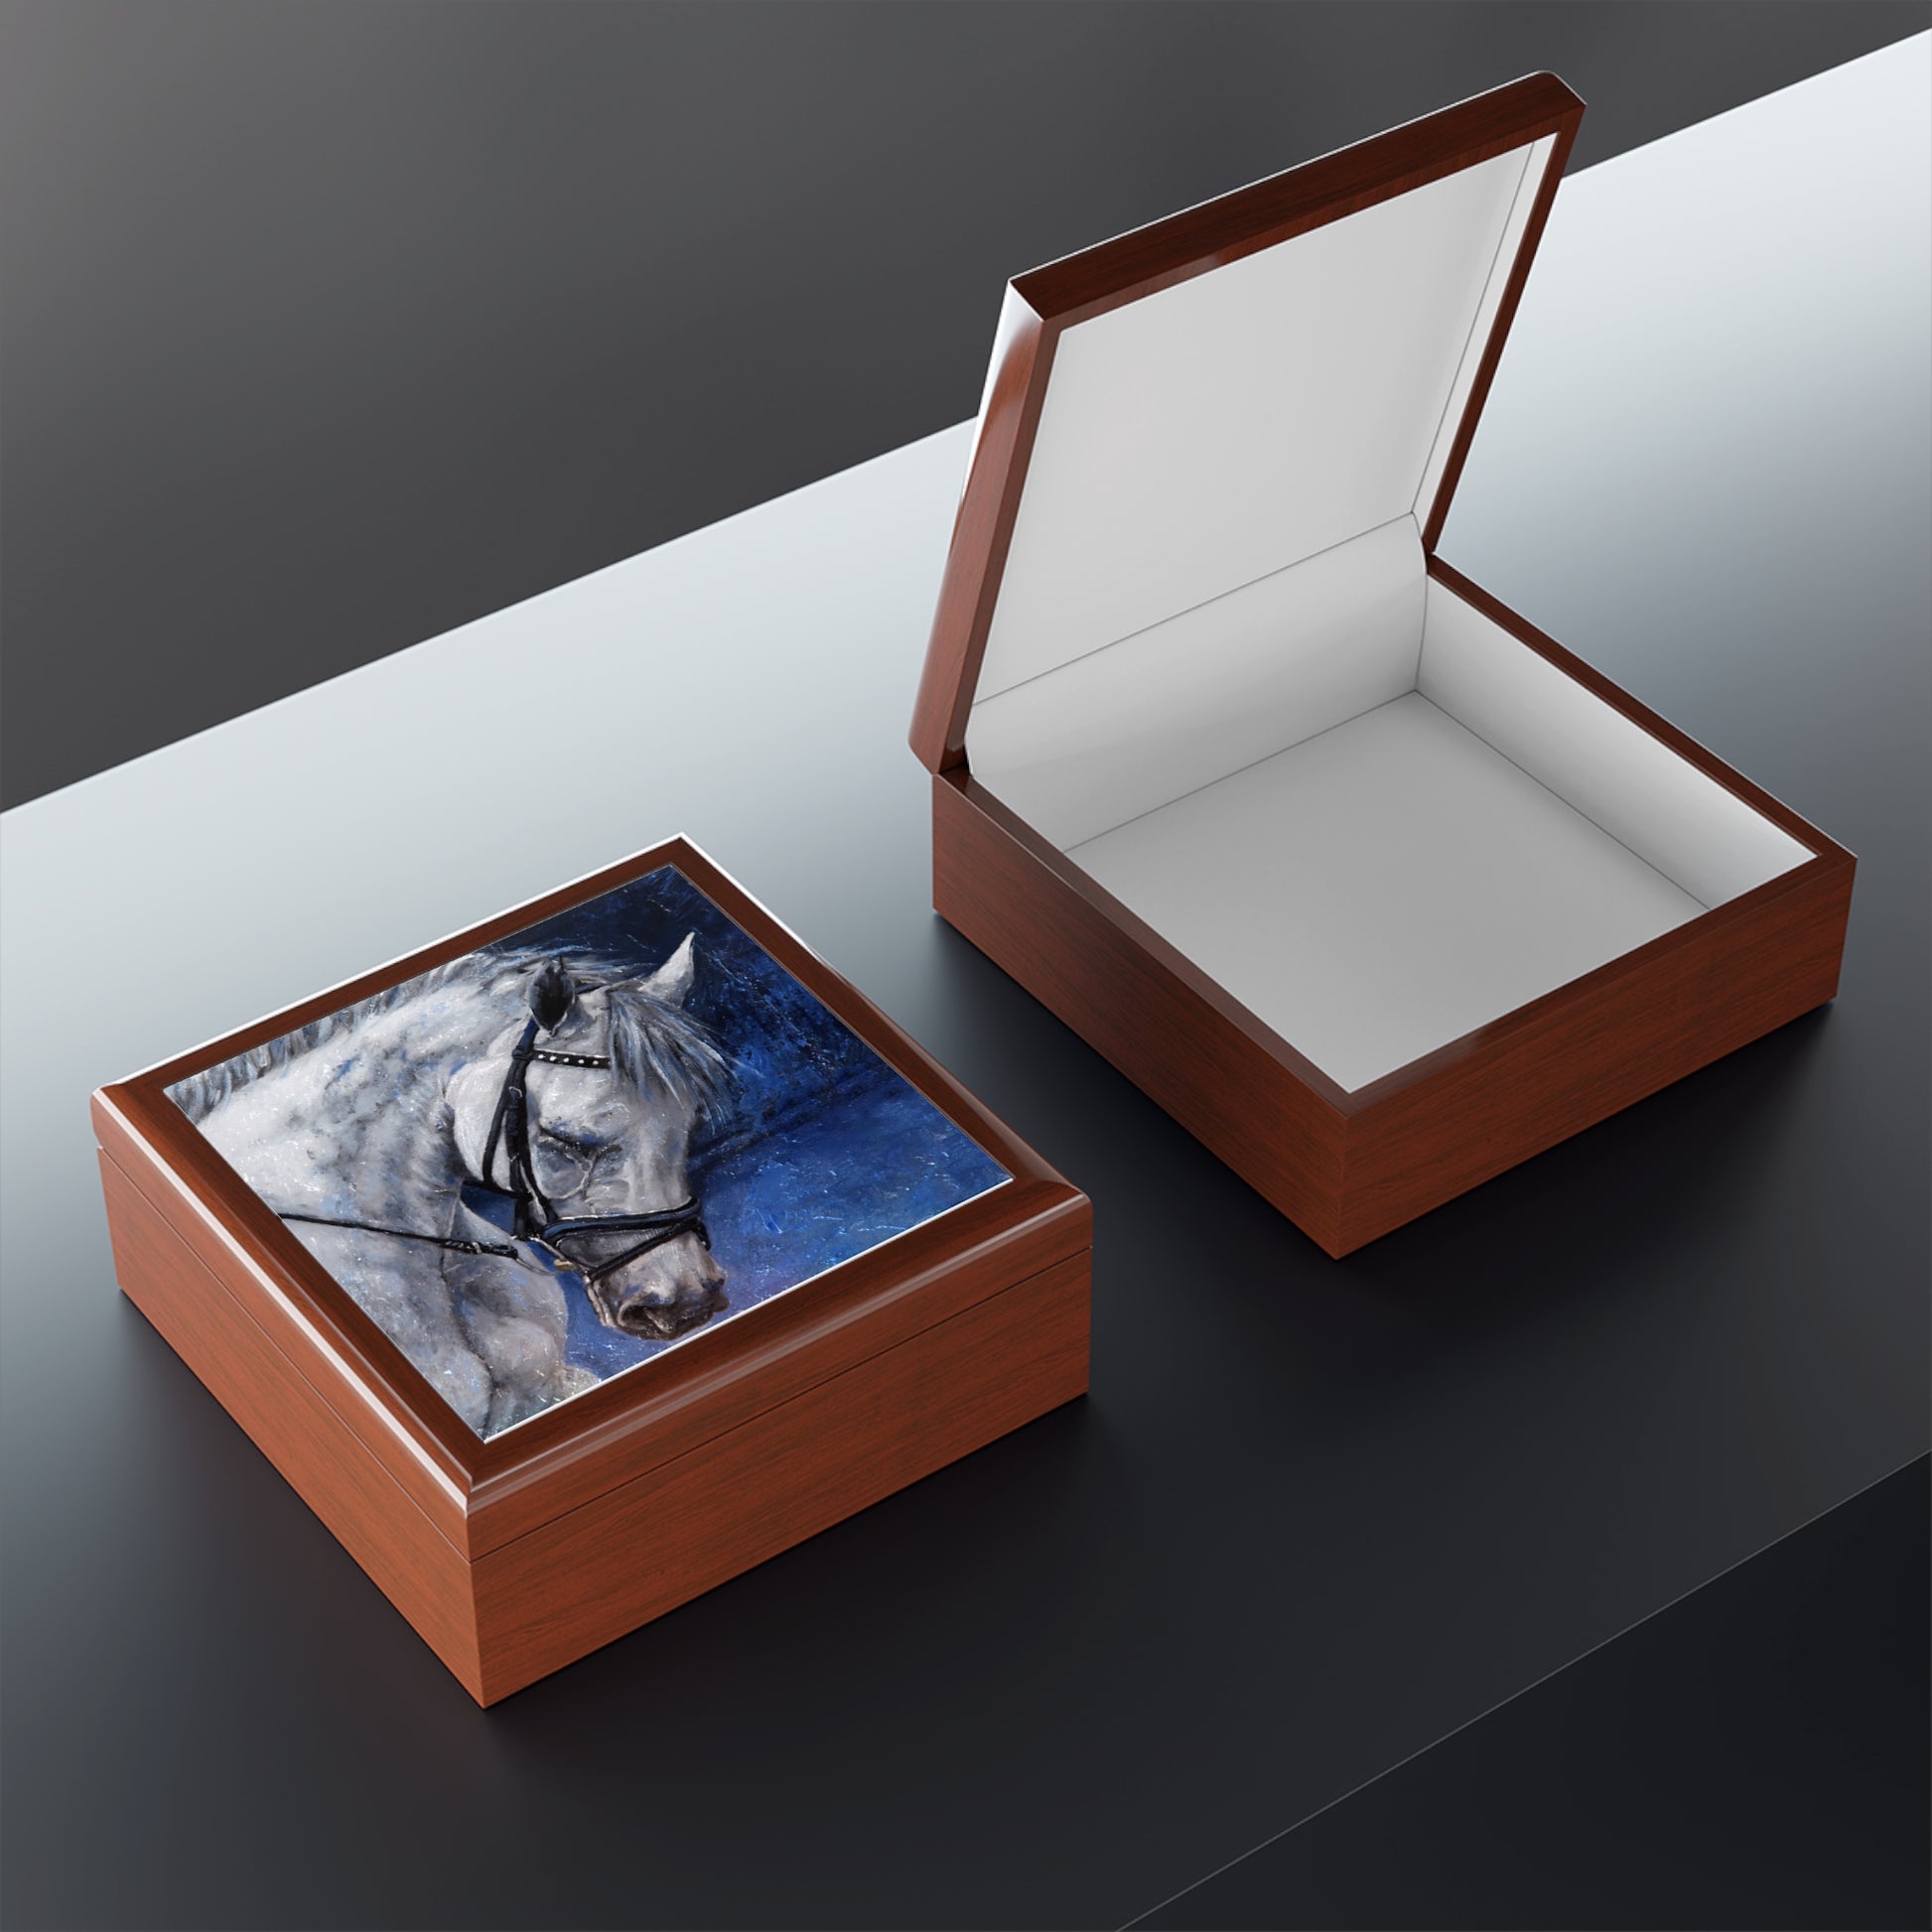 Jewelry Box - Keepsake Box with Grey Horse cover open